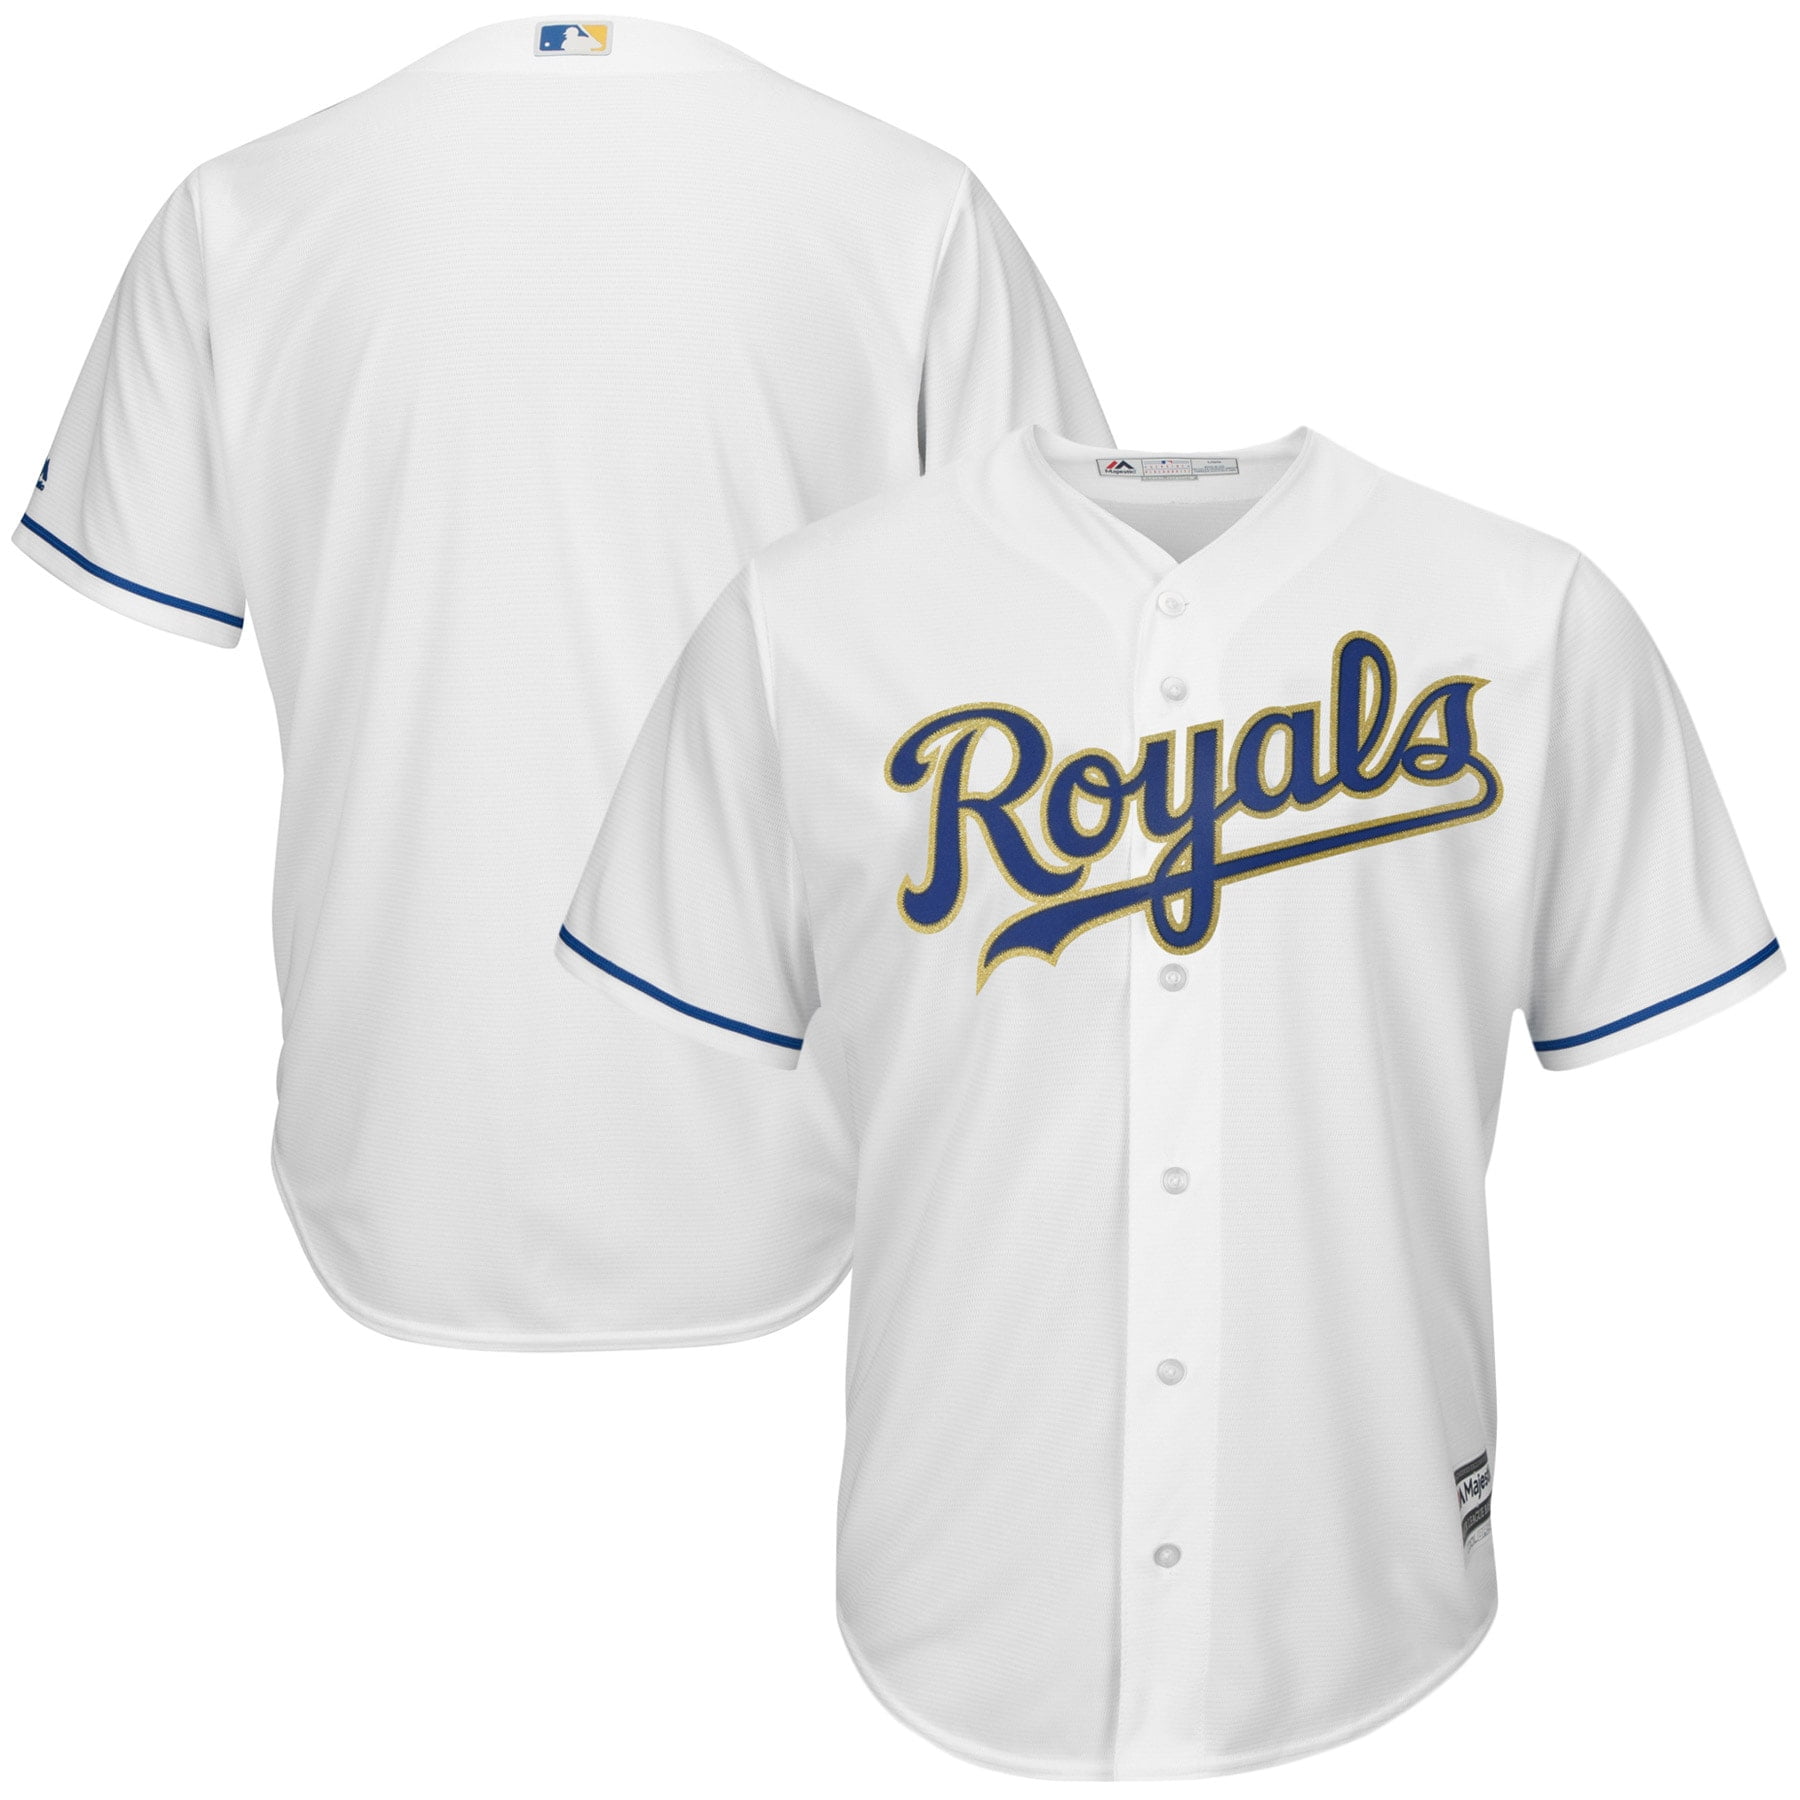 all about that base royals shirt